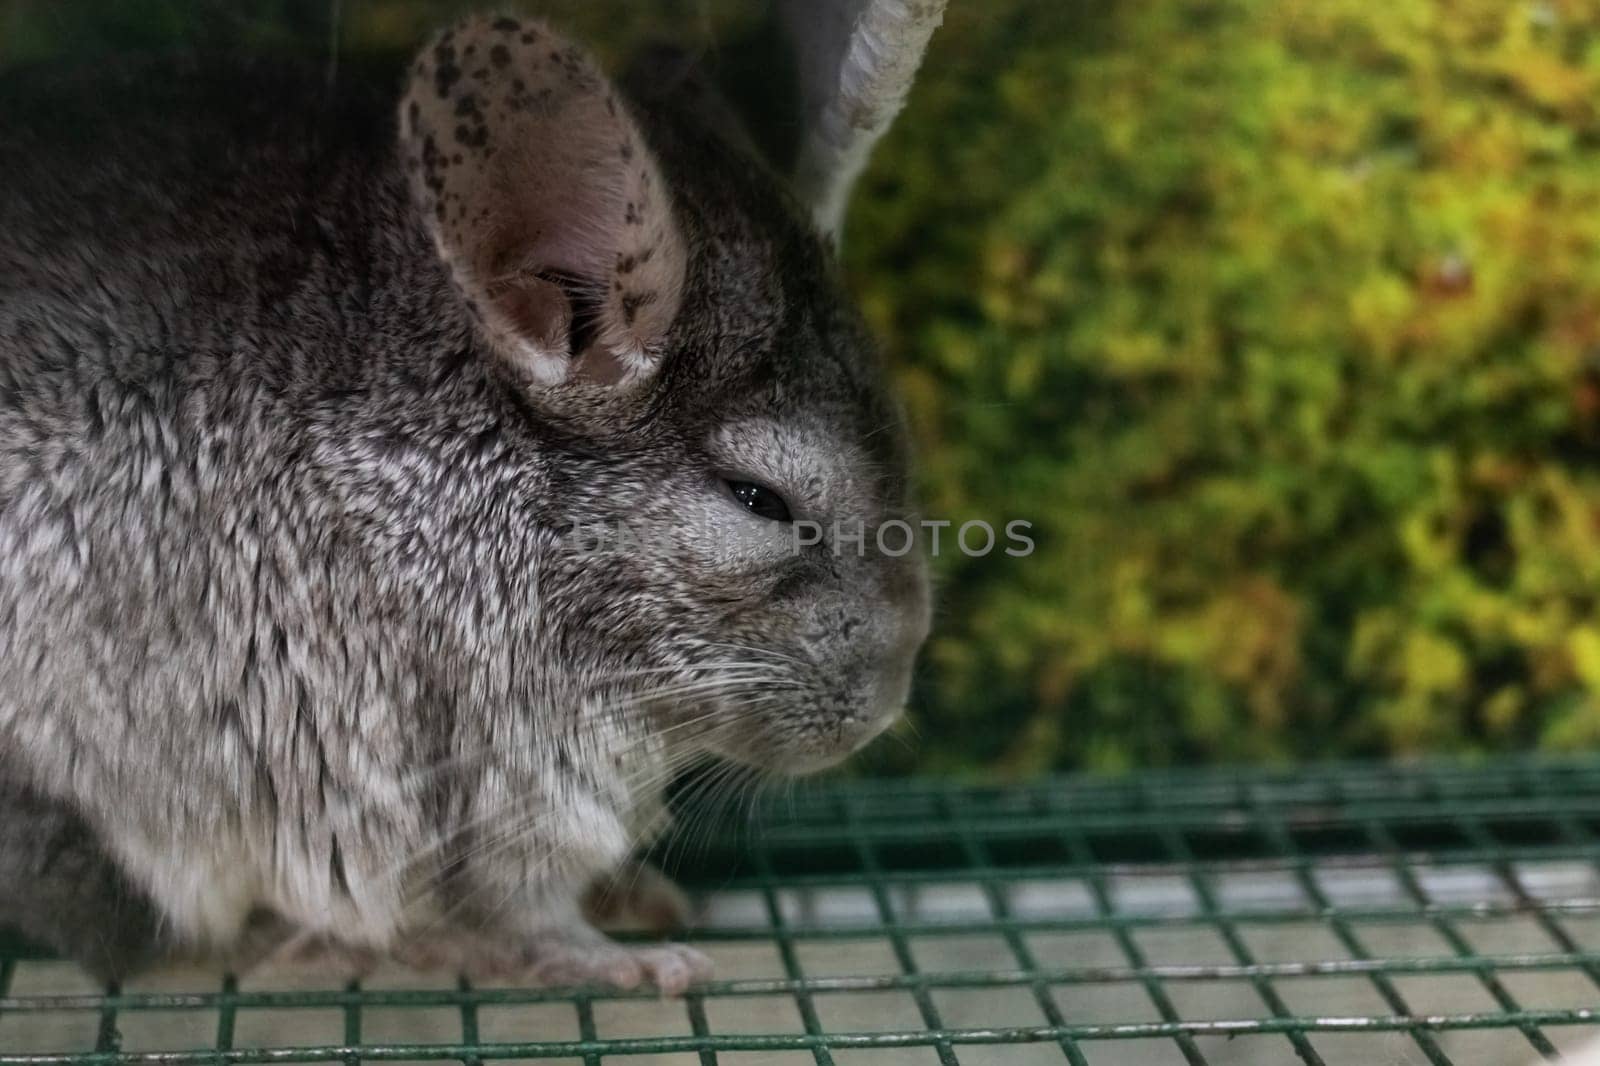 Home gray rabbit in a cage, with copy space